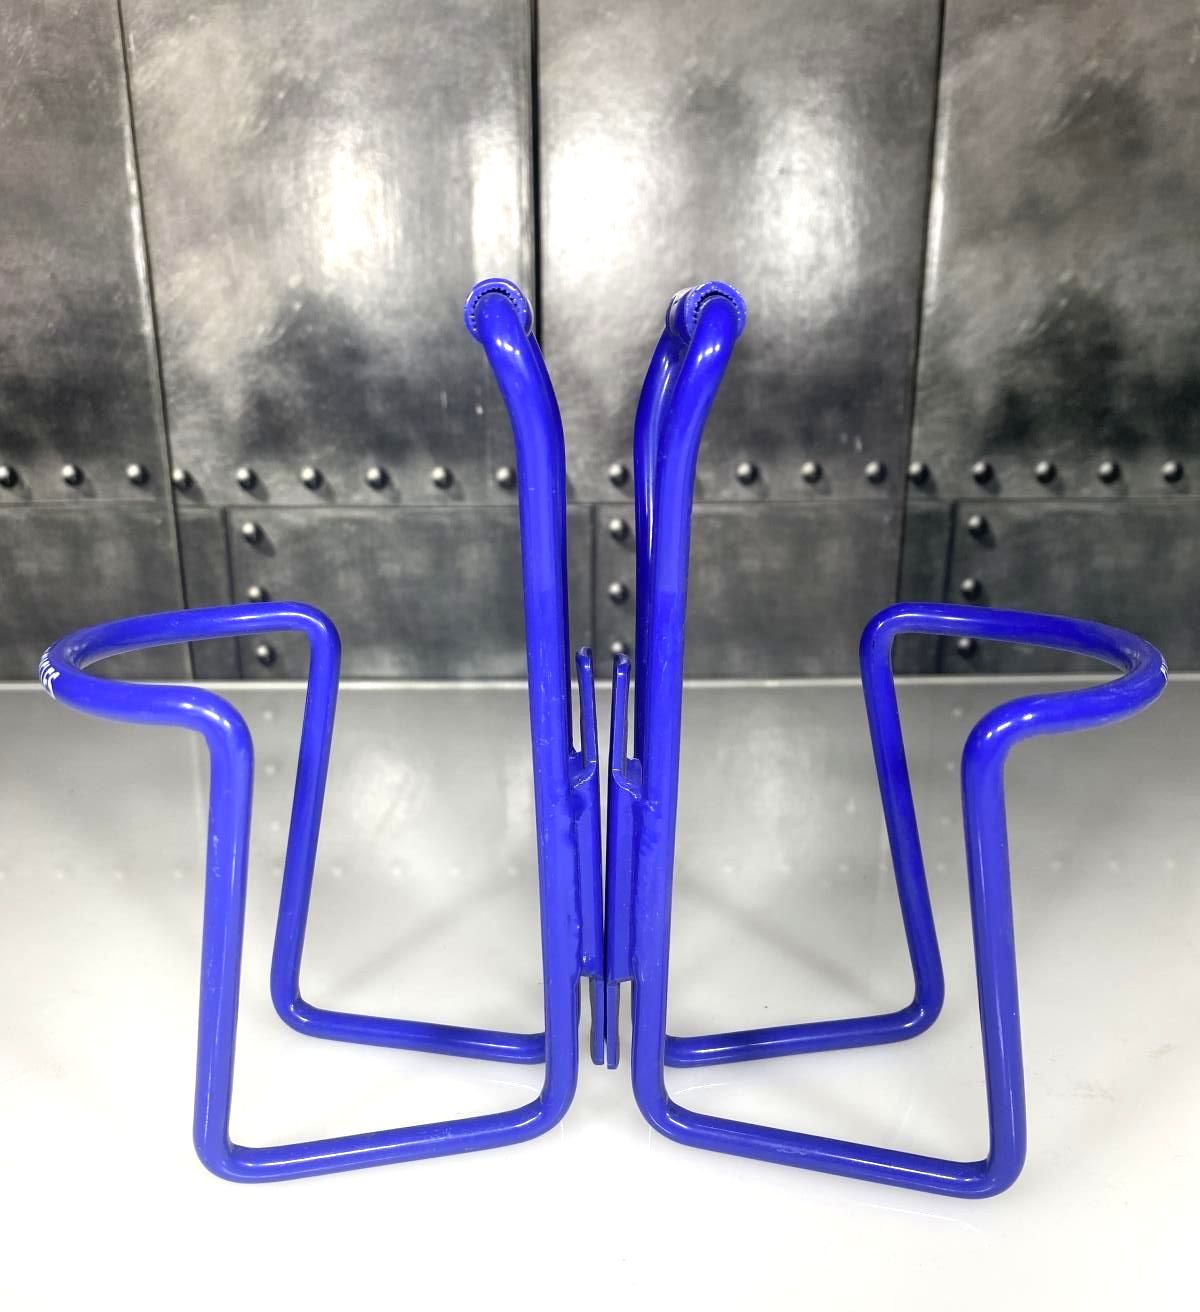 Lot Two of Blue Flying Wheel Bicycles Bike Water Bottle Cage